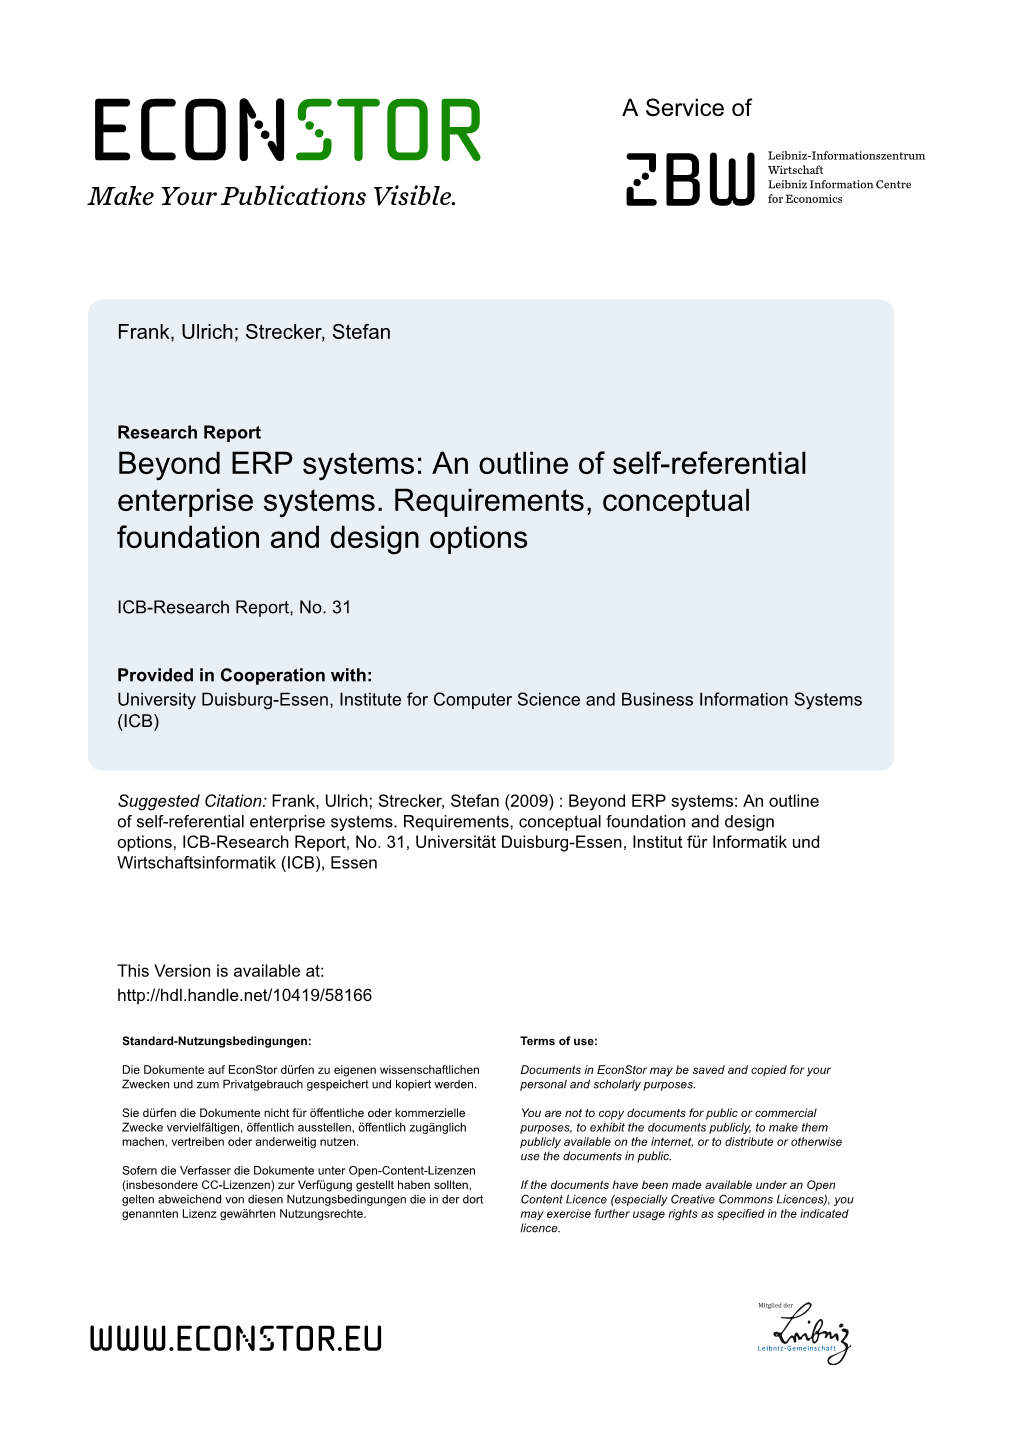 Beyond ERP Systems: an Outline of Self-Referential Enterprise Systems